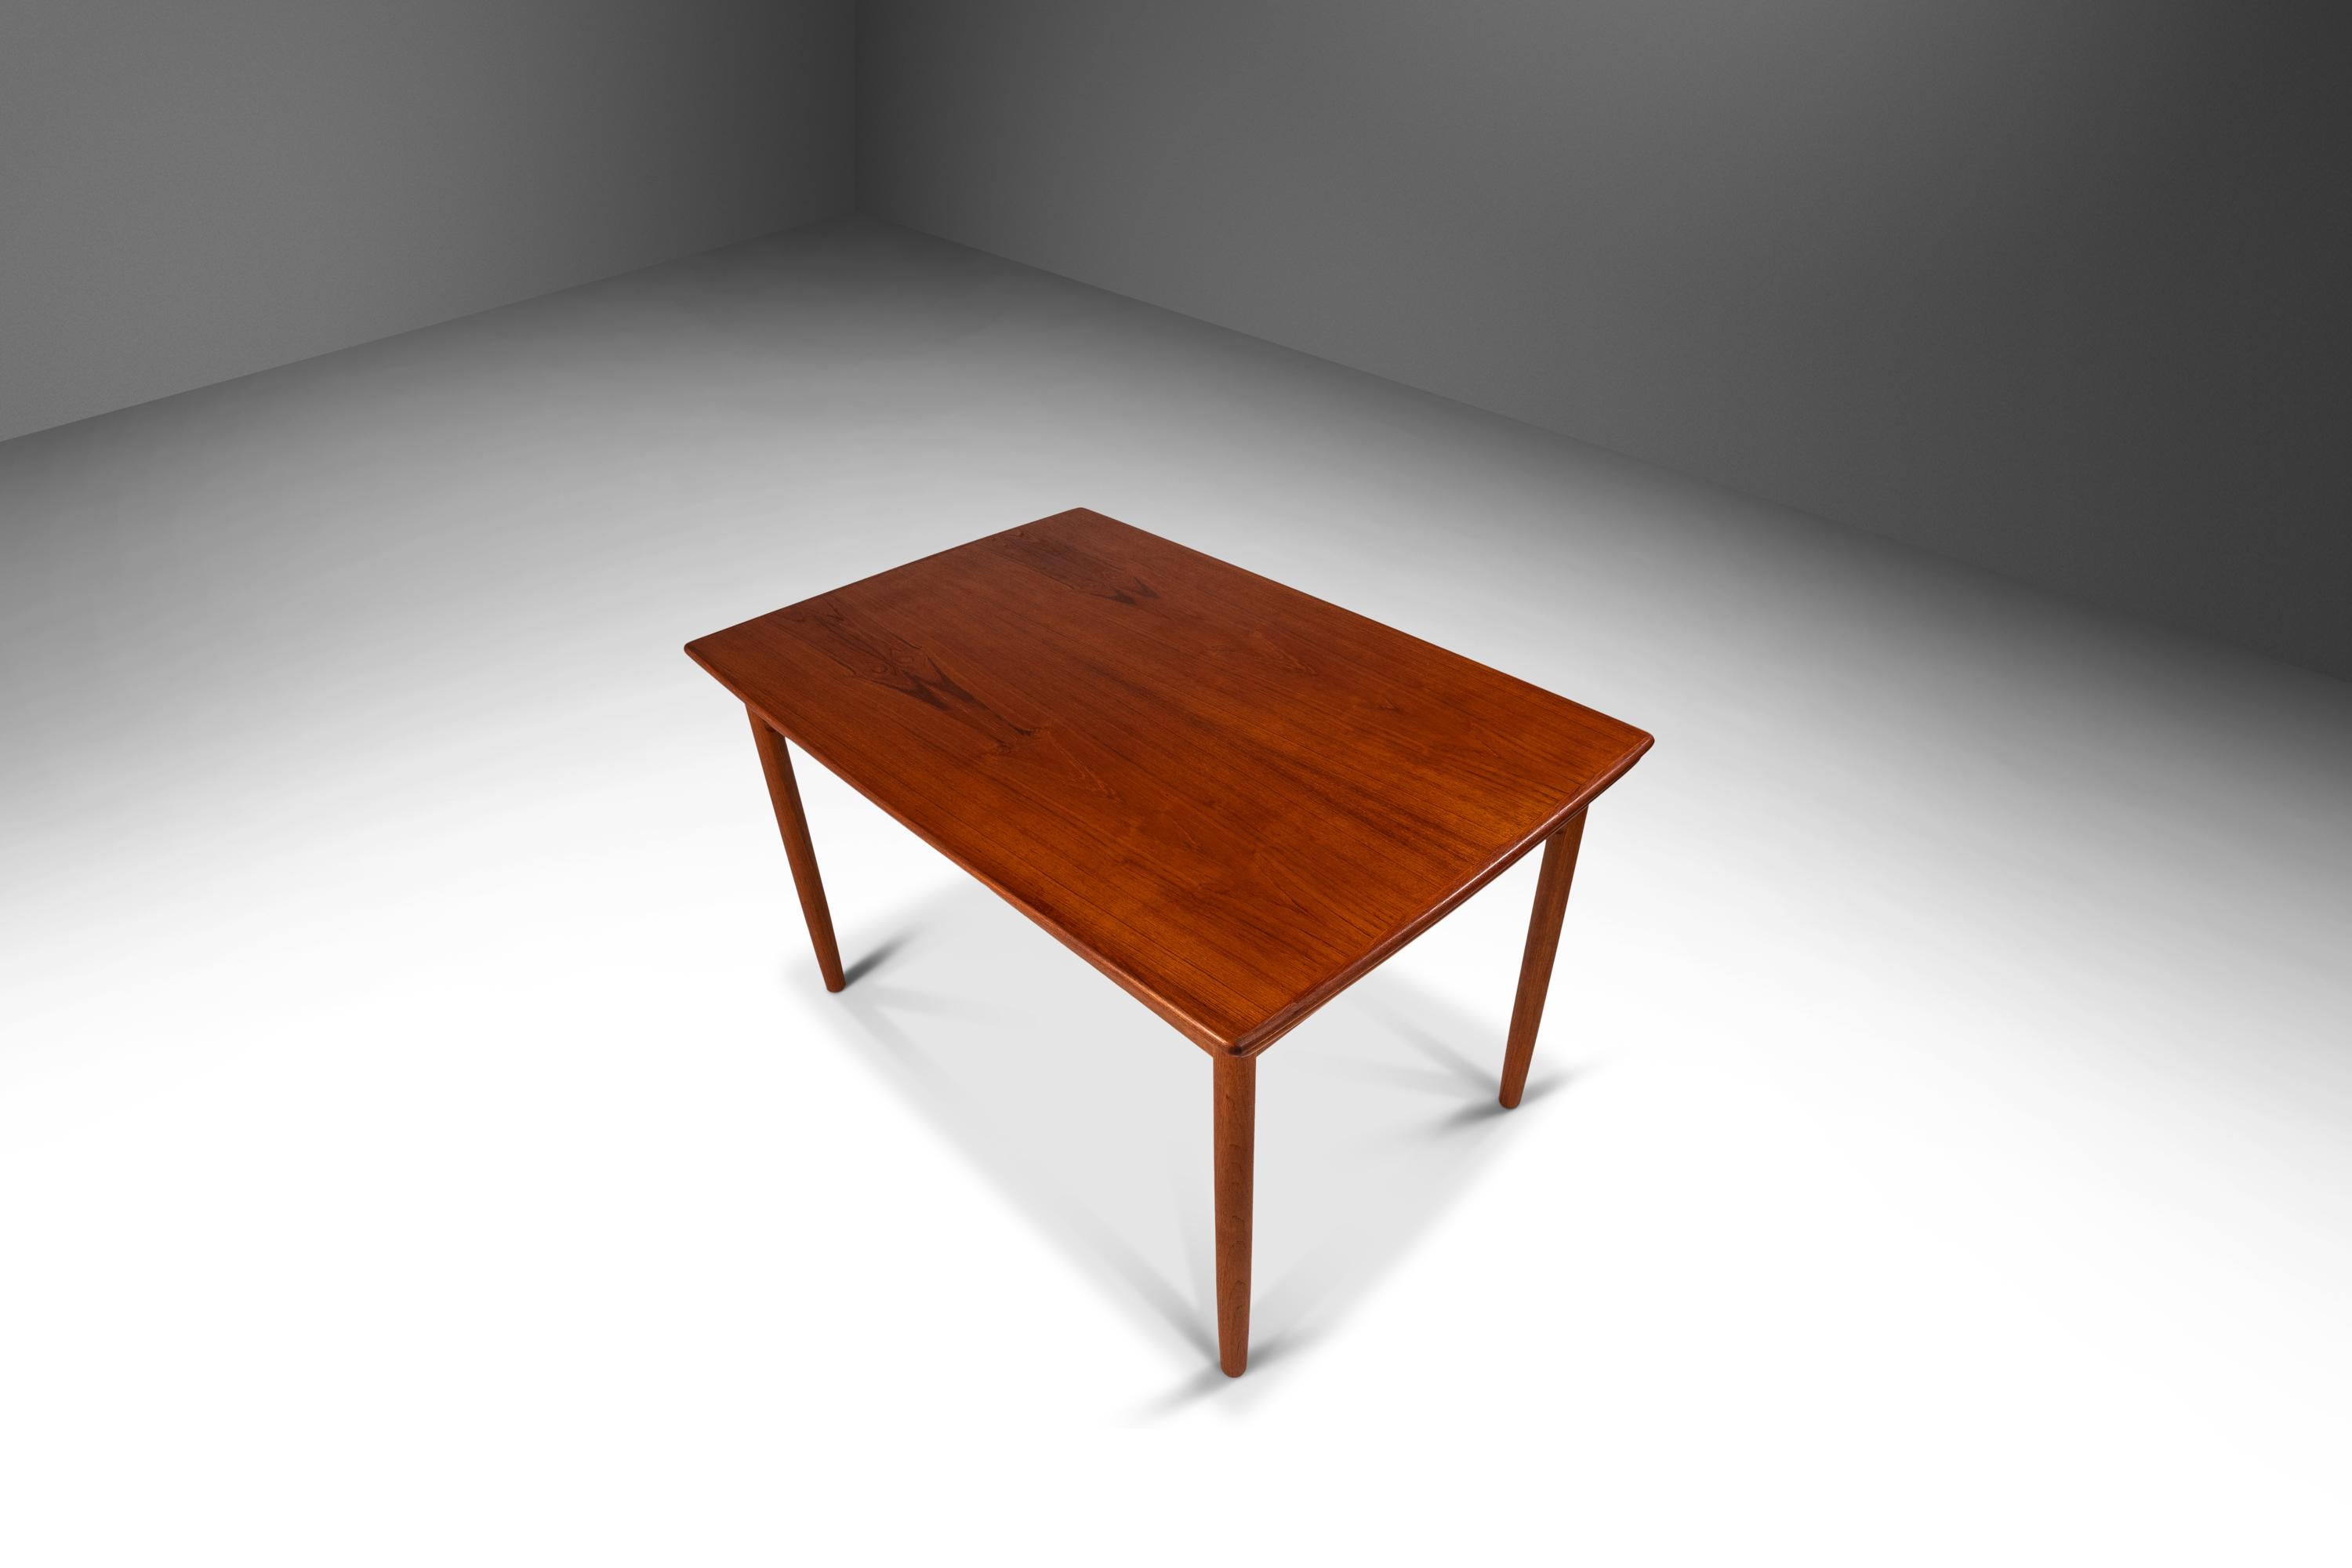 Danish Modern Expansion Dining Table in Teak w/ Stow-In-Table Leaves, c. 1960s For Sale 4